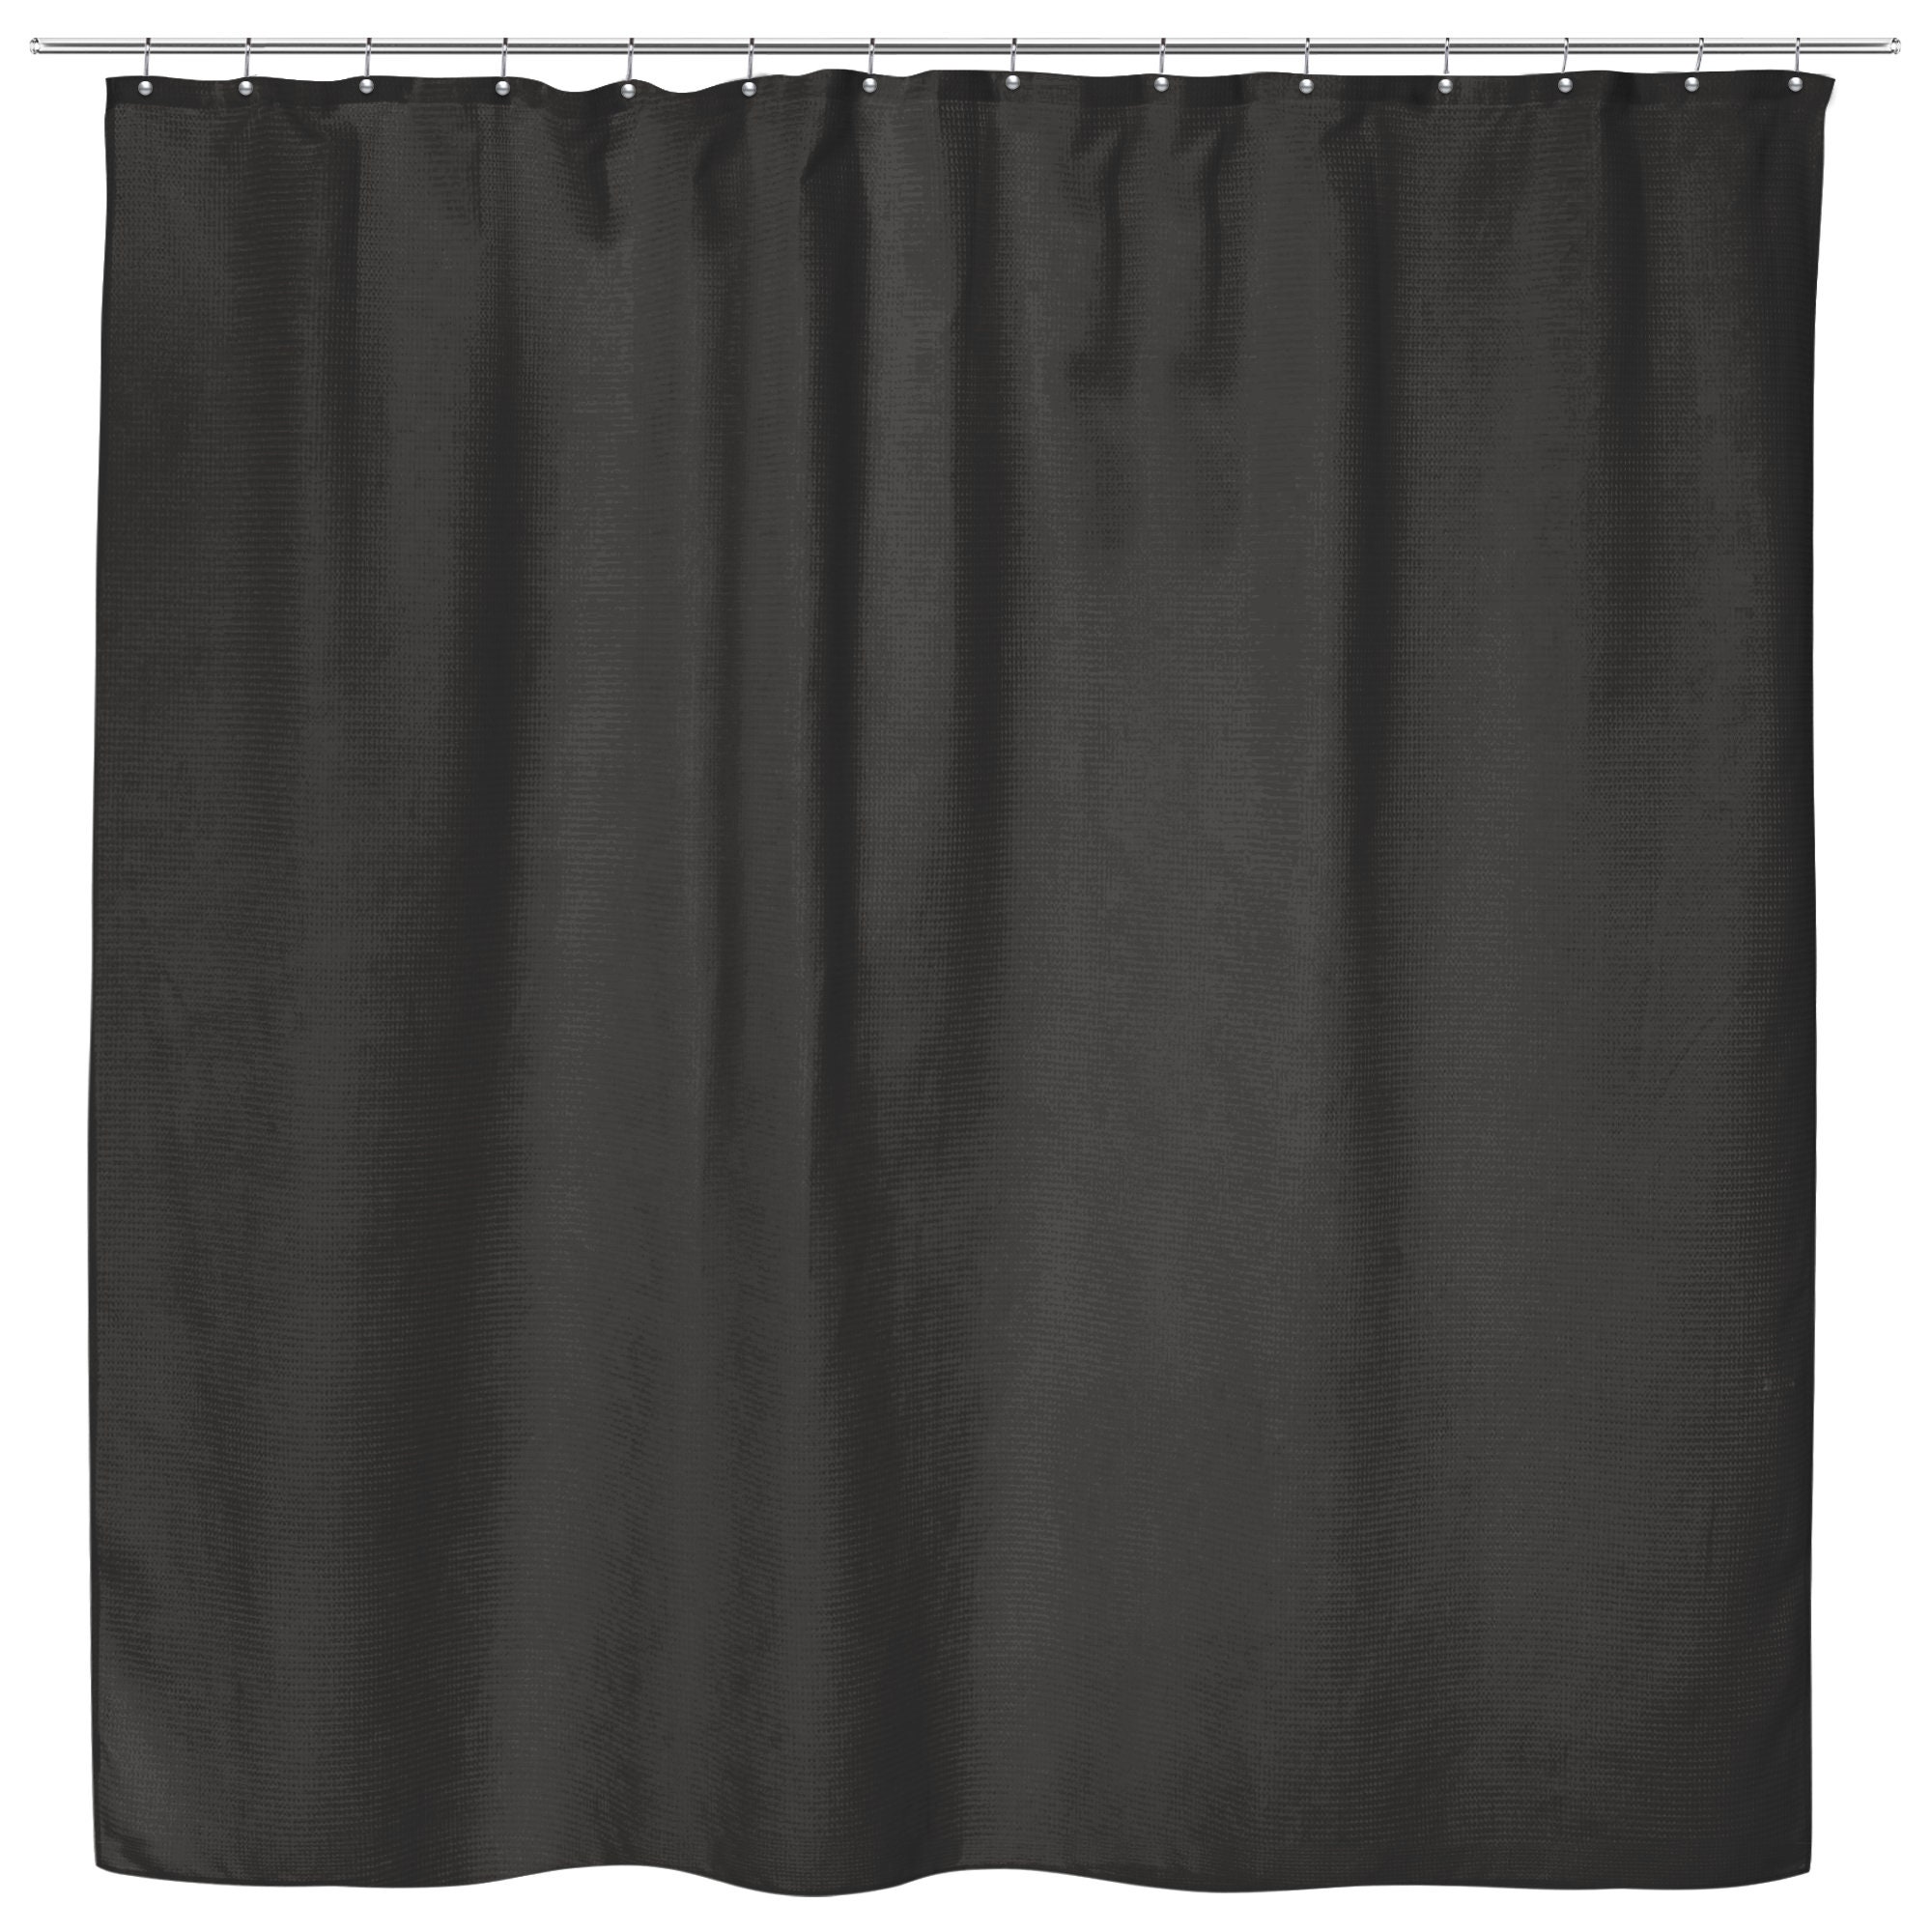 Black Curtain Oxford Shower Curtain Solid Color - Etsy